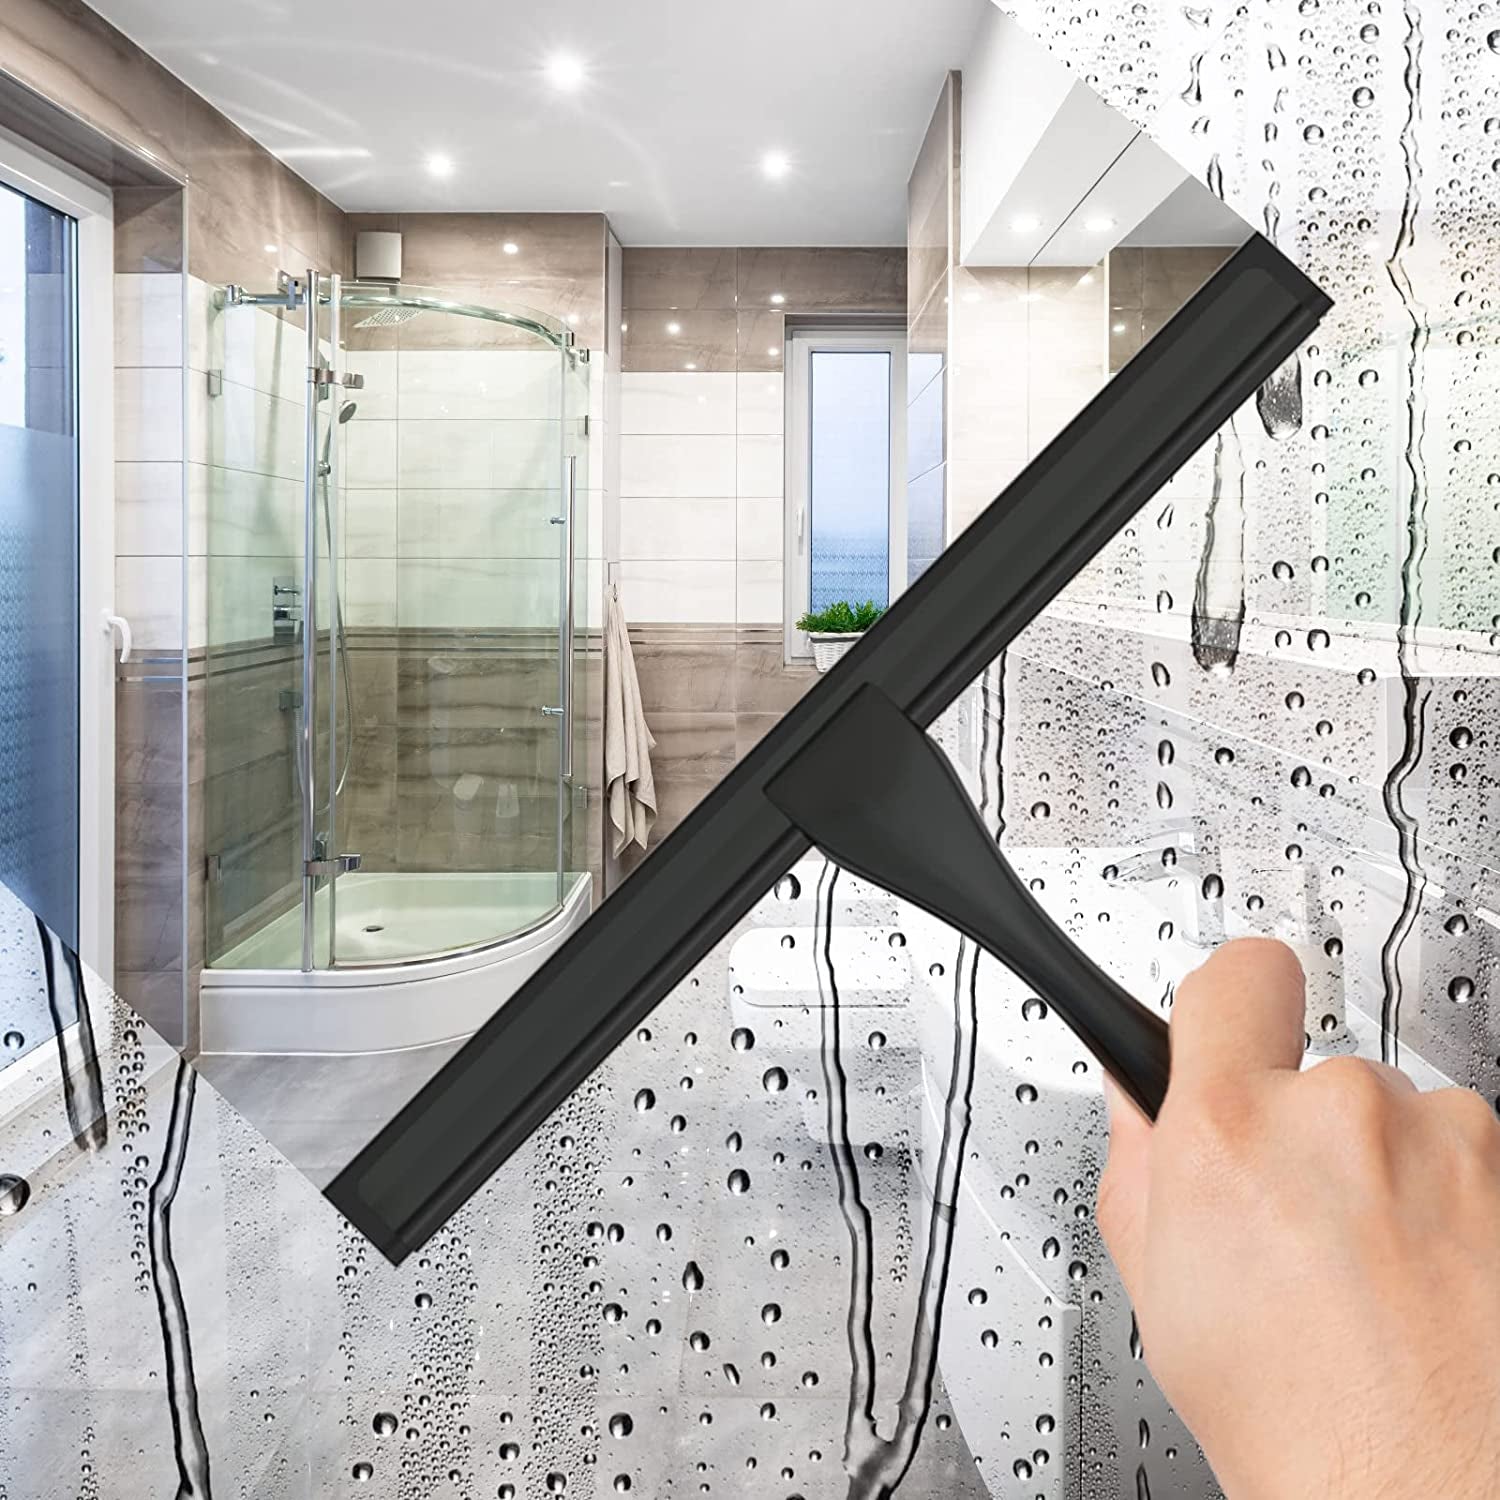 All-Purpose Stainless Steel Shower Squeegee for Shower Doors with 2 Adhesive Hooks, Bathroom Cleaner Tool Household Window Mirror Squeegee for Home Cleaning, Glass Door, Tile Wall, Car, 12 Inch Black